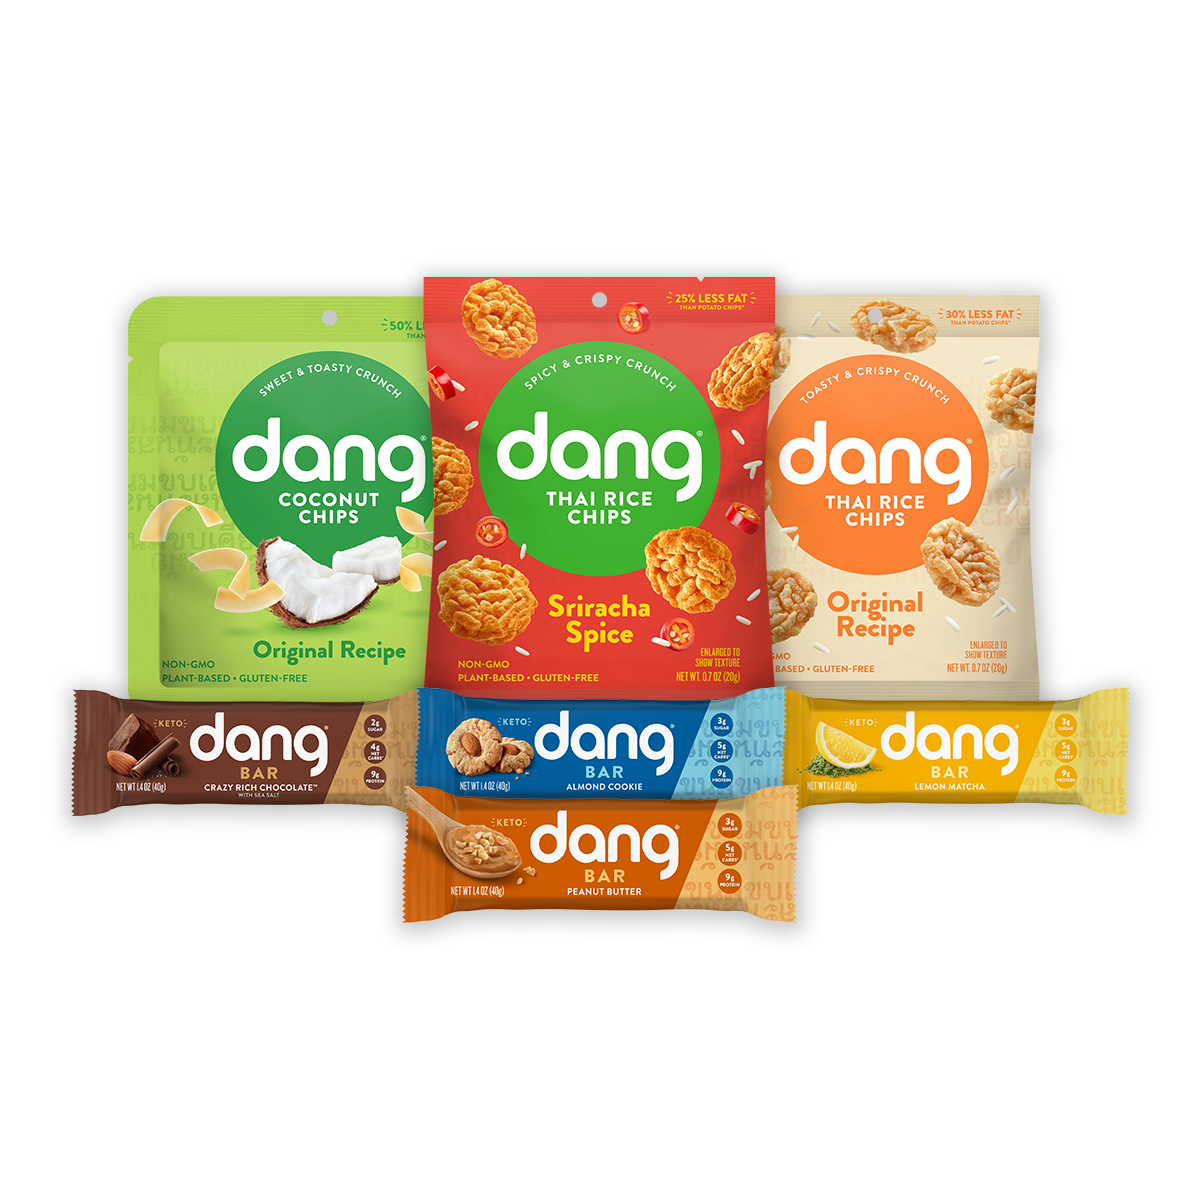 Stay-At-Home Bundle with Coconut Chips, Thai Rice Chips, Dang Bar (60 Count)